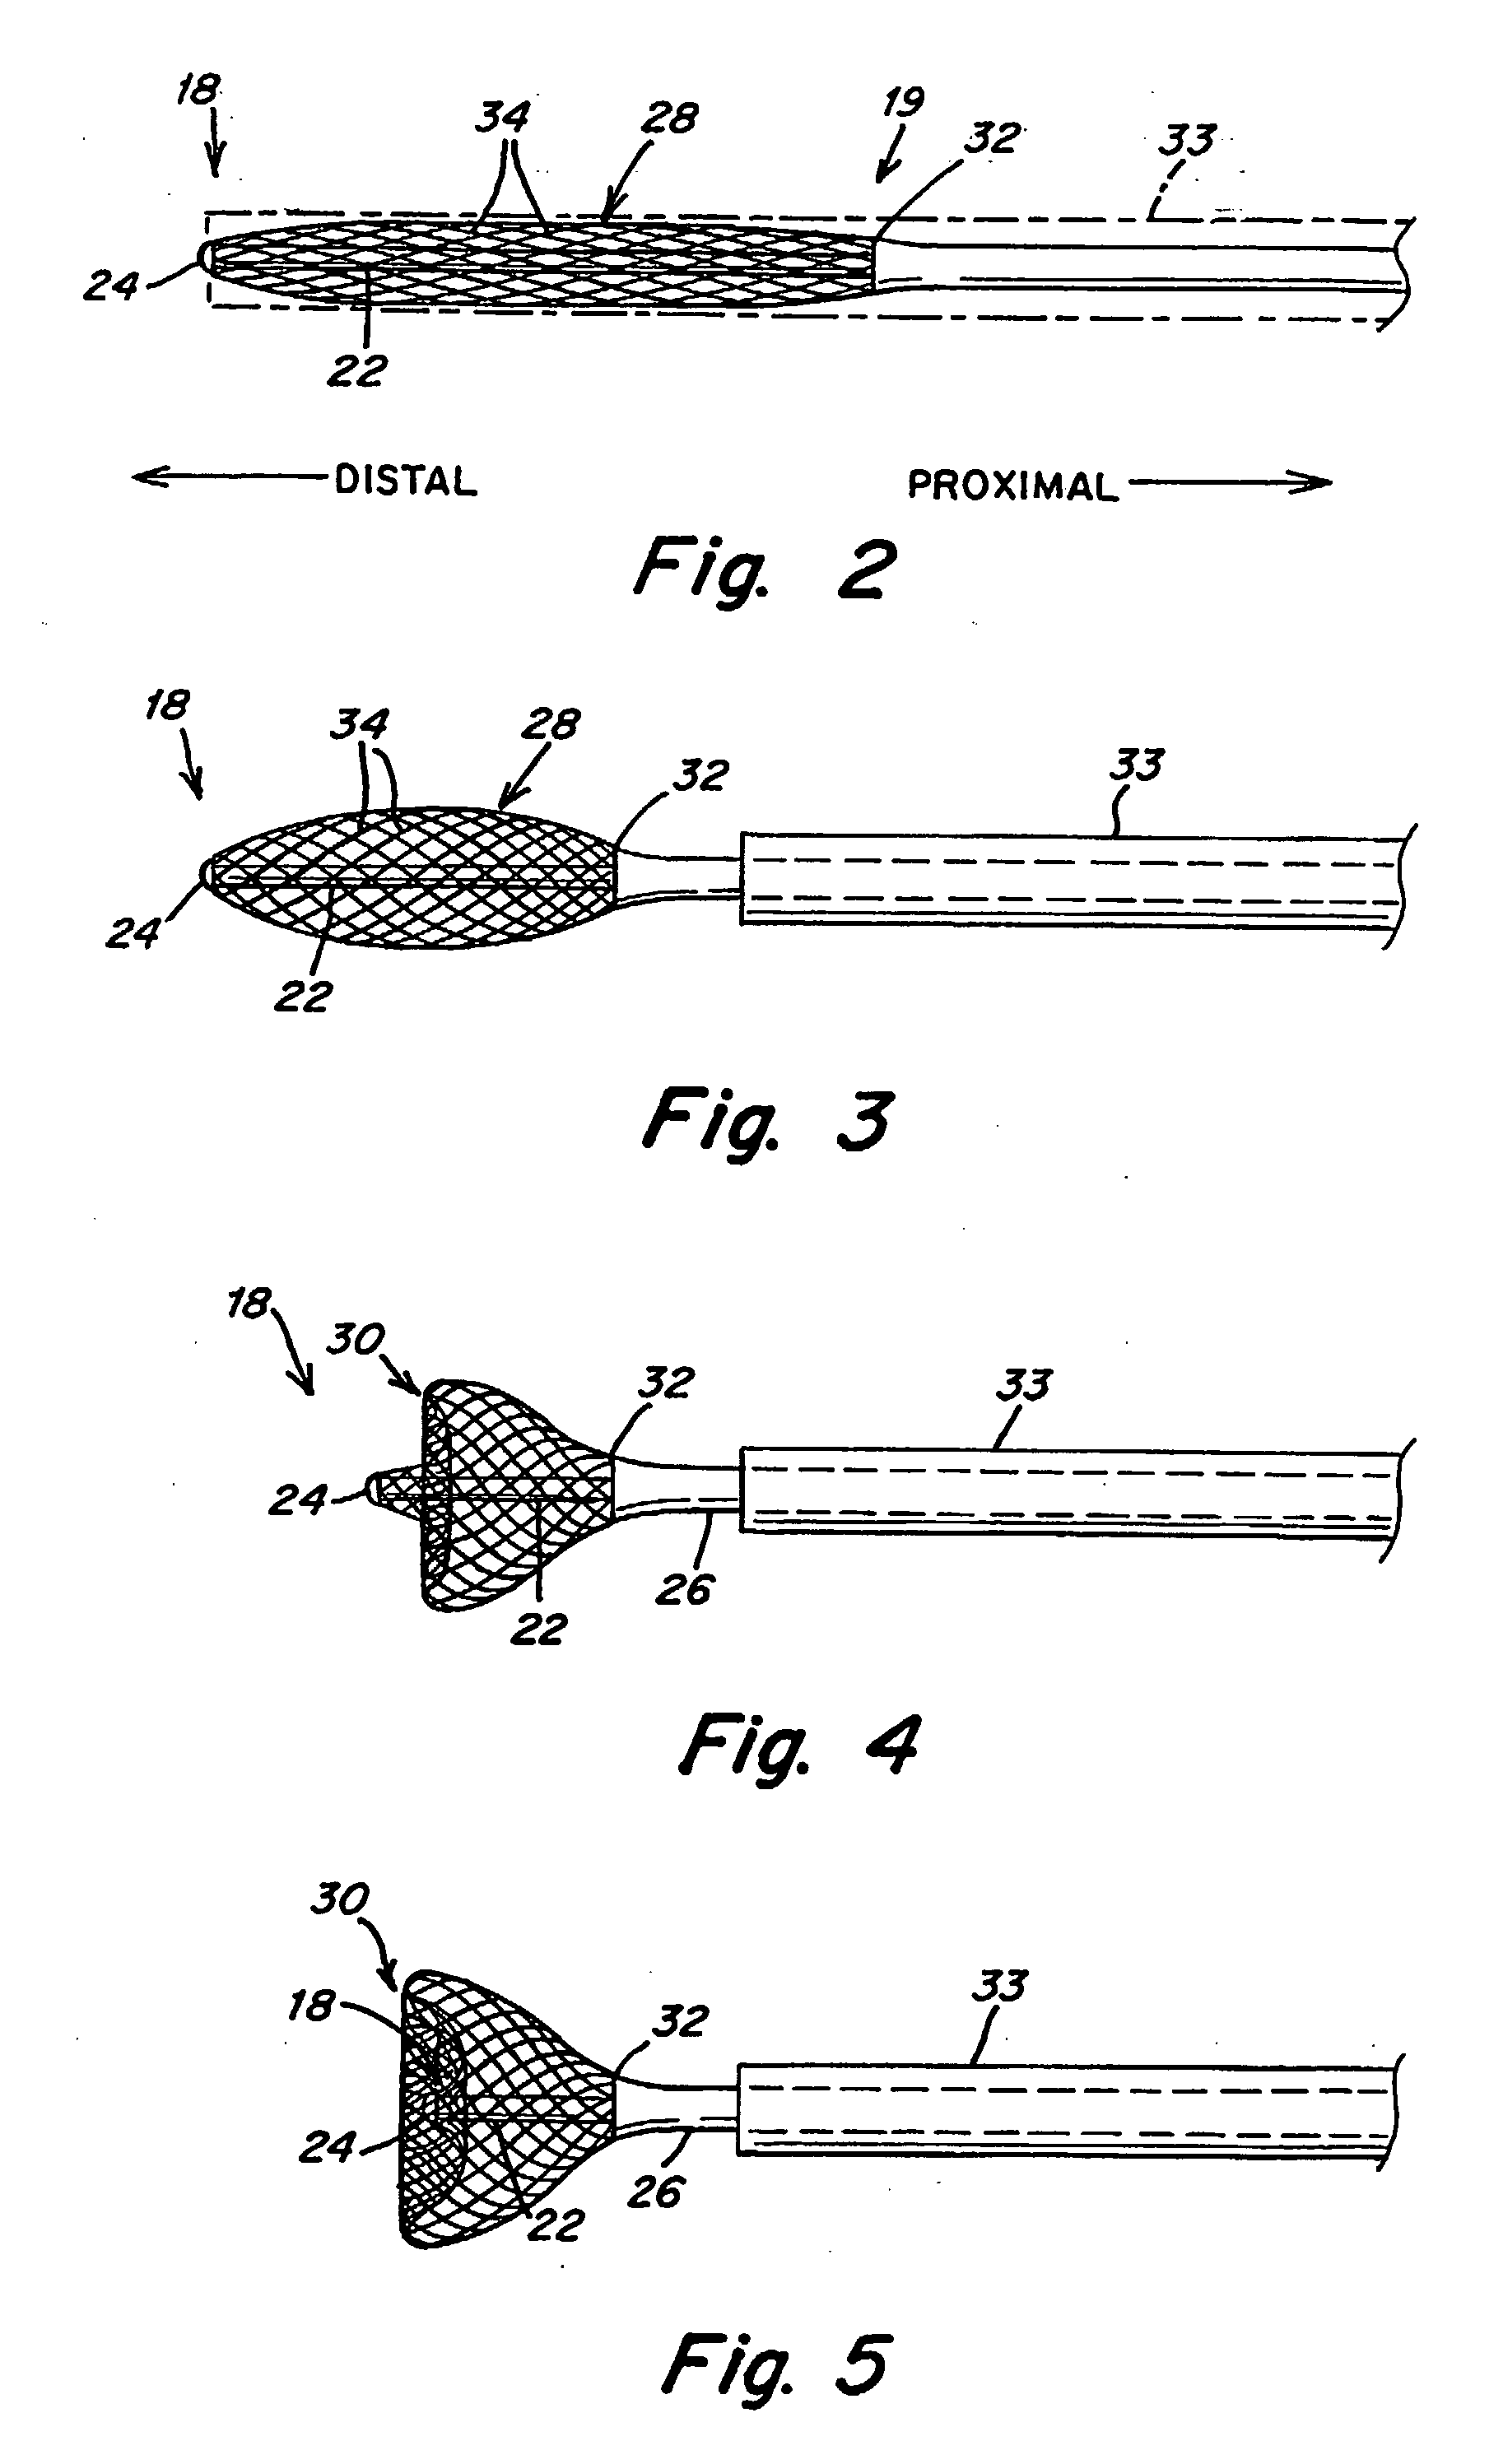 Method and Apparatus for Mapping and/or Ablation of Cardiac Tissue